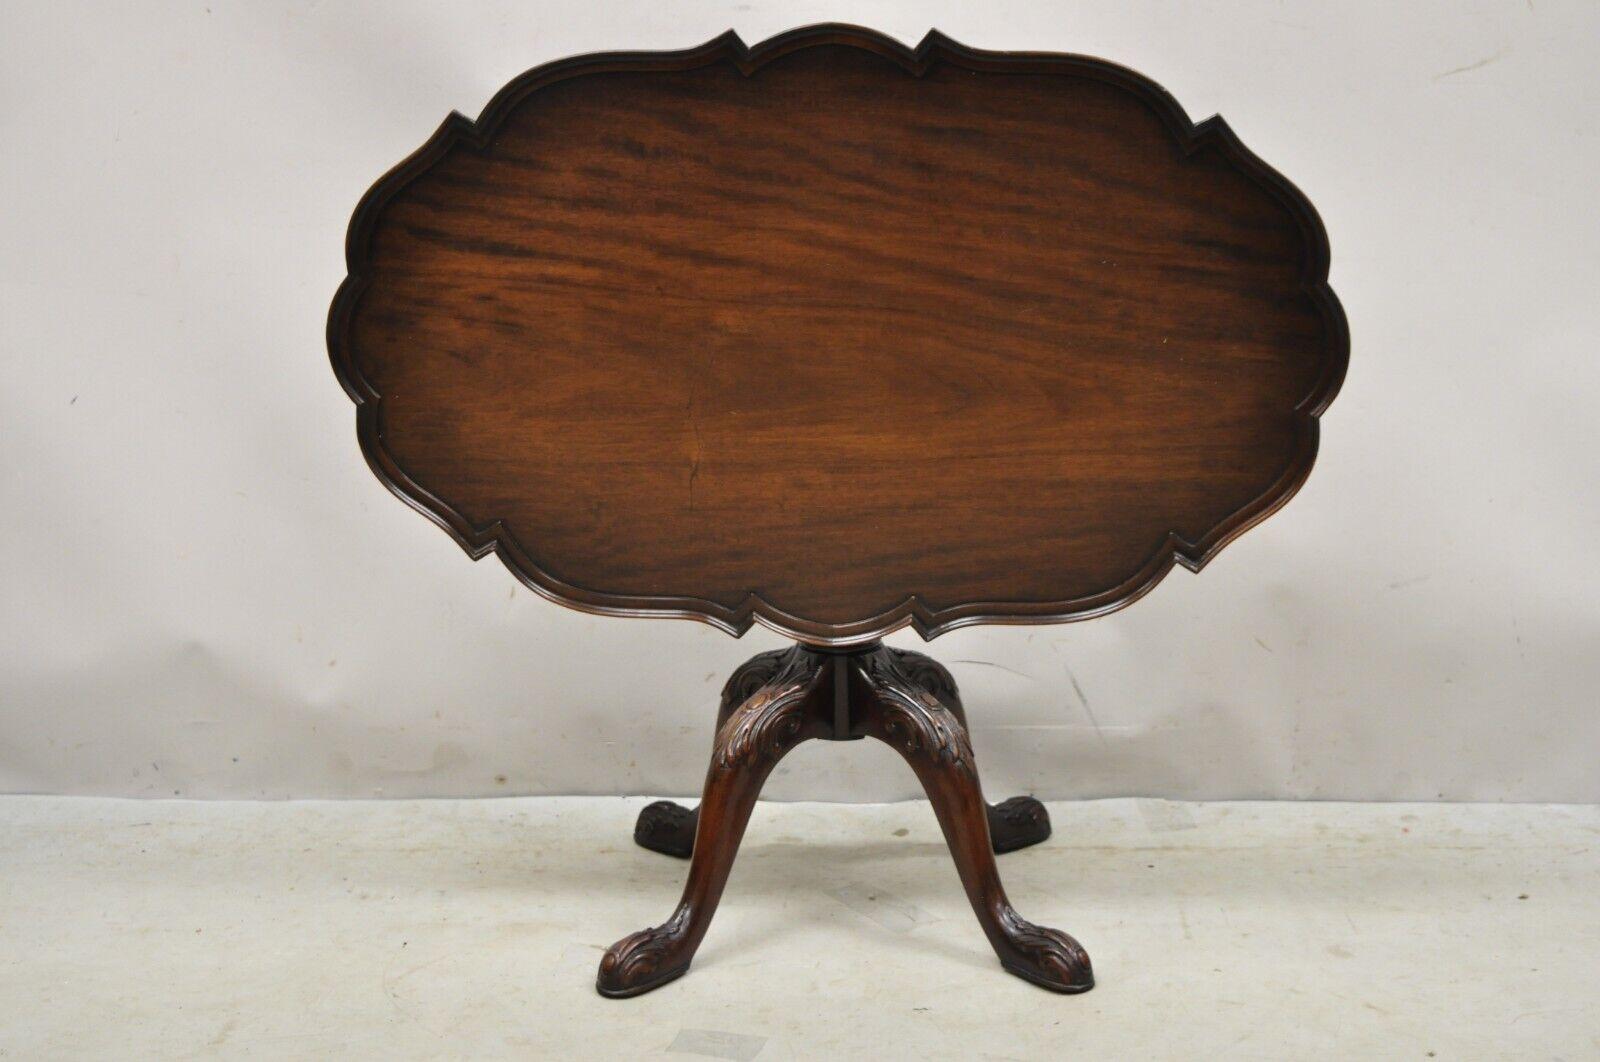 Vintage Mahogany Chippendale Style Tilt Top Pedestal Base Scalloped Oval Coffee Table. Item features a tilt top, beautiful wood grain, nicely carved details, very nice vintage item, quality American craftsmanship, great style and form. Circa Early